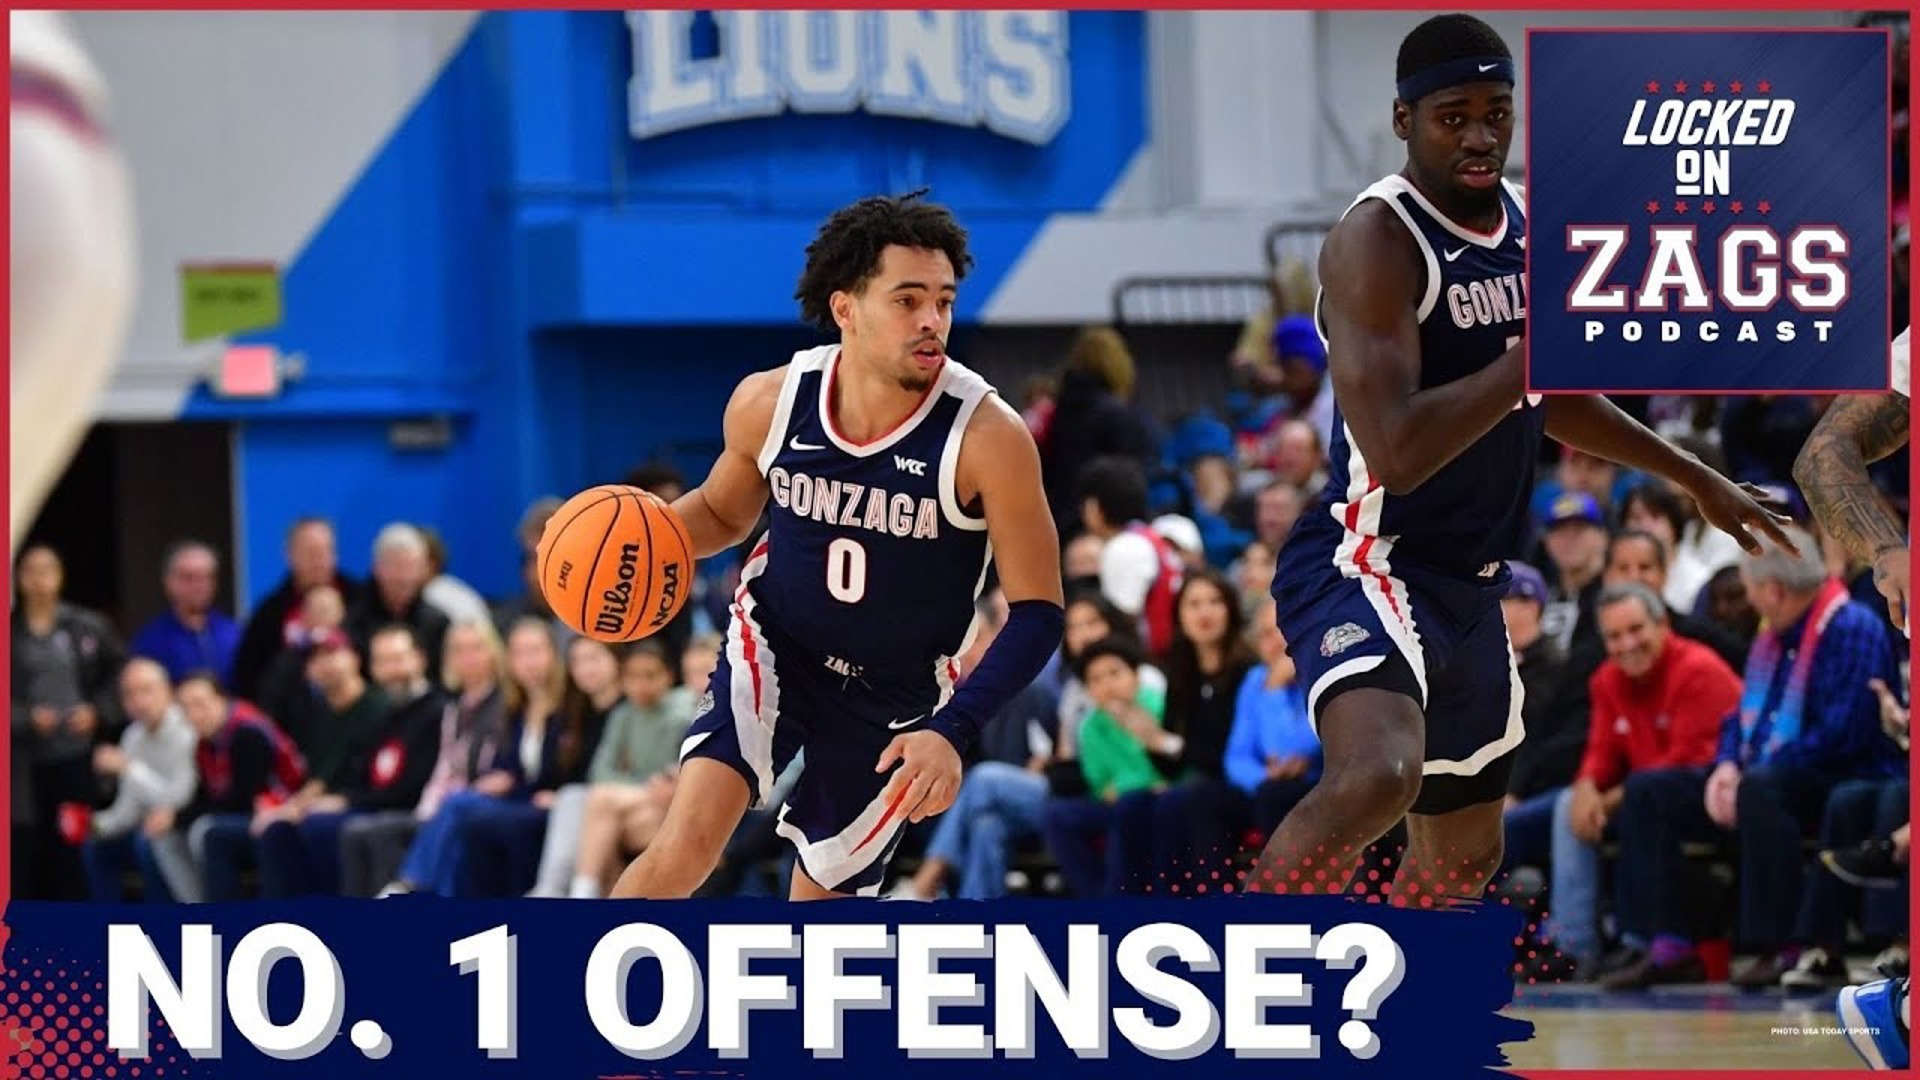 Mark Few and the Gonzaga Bulldogs have the projected No. 1 offense in college basketball according to Bart Torvik's website.